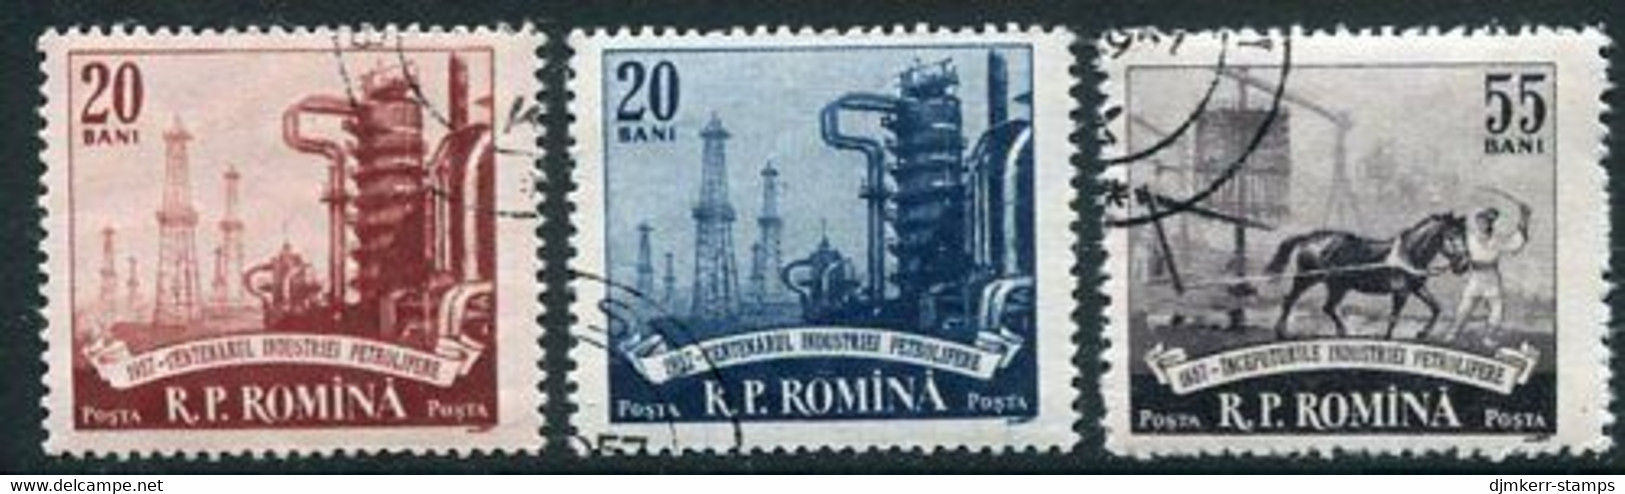 ROMANIA 1957 Centenary Of Oil Industry Used.  Michel 1671-73 - Used Stamps